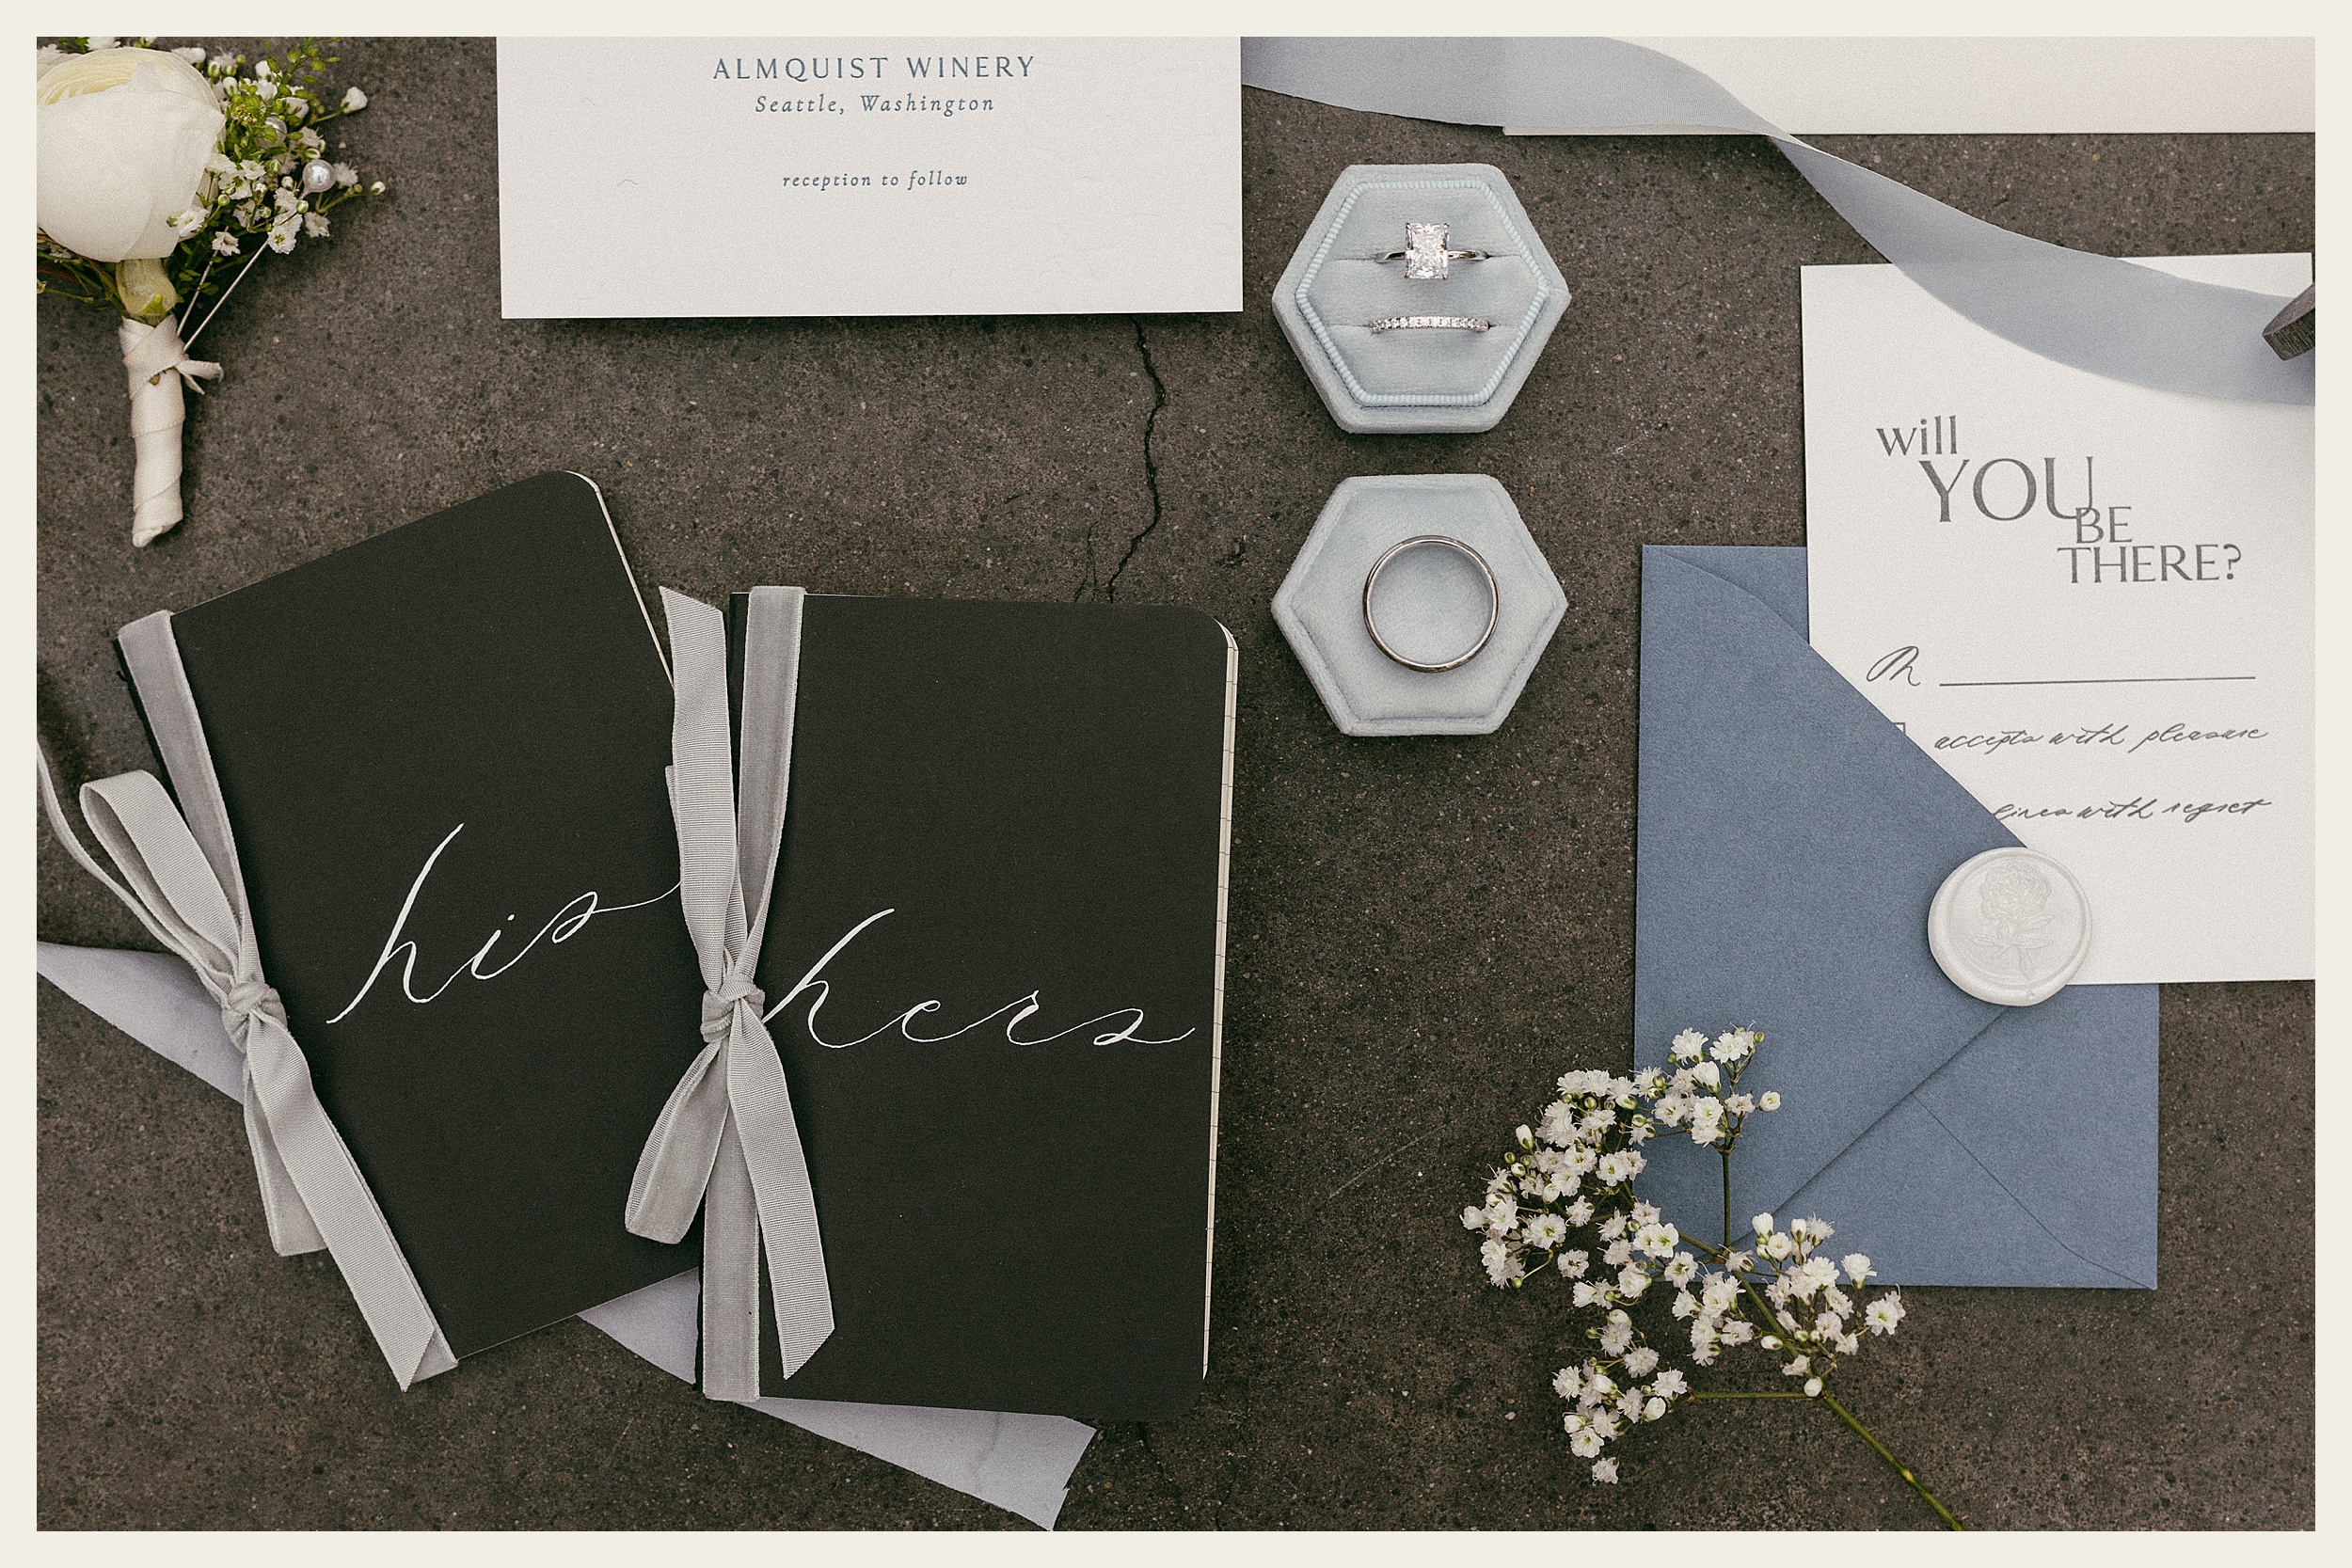 wedding favors, vows, envelopes, rings and flowers